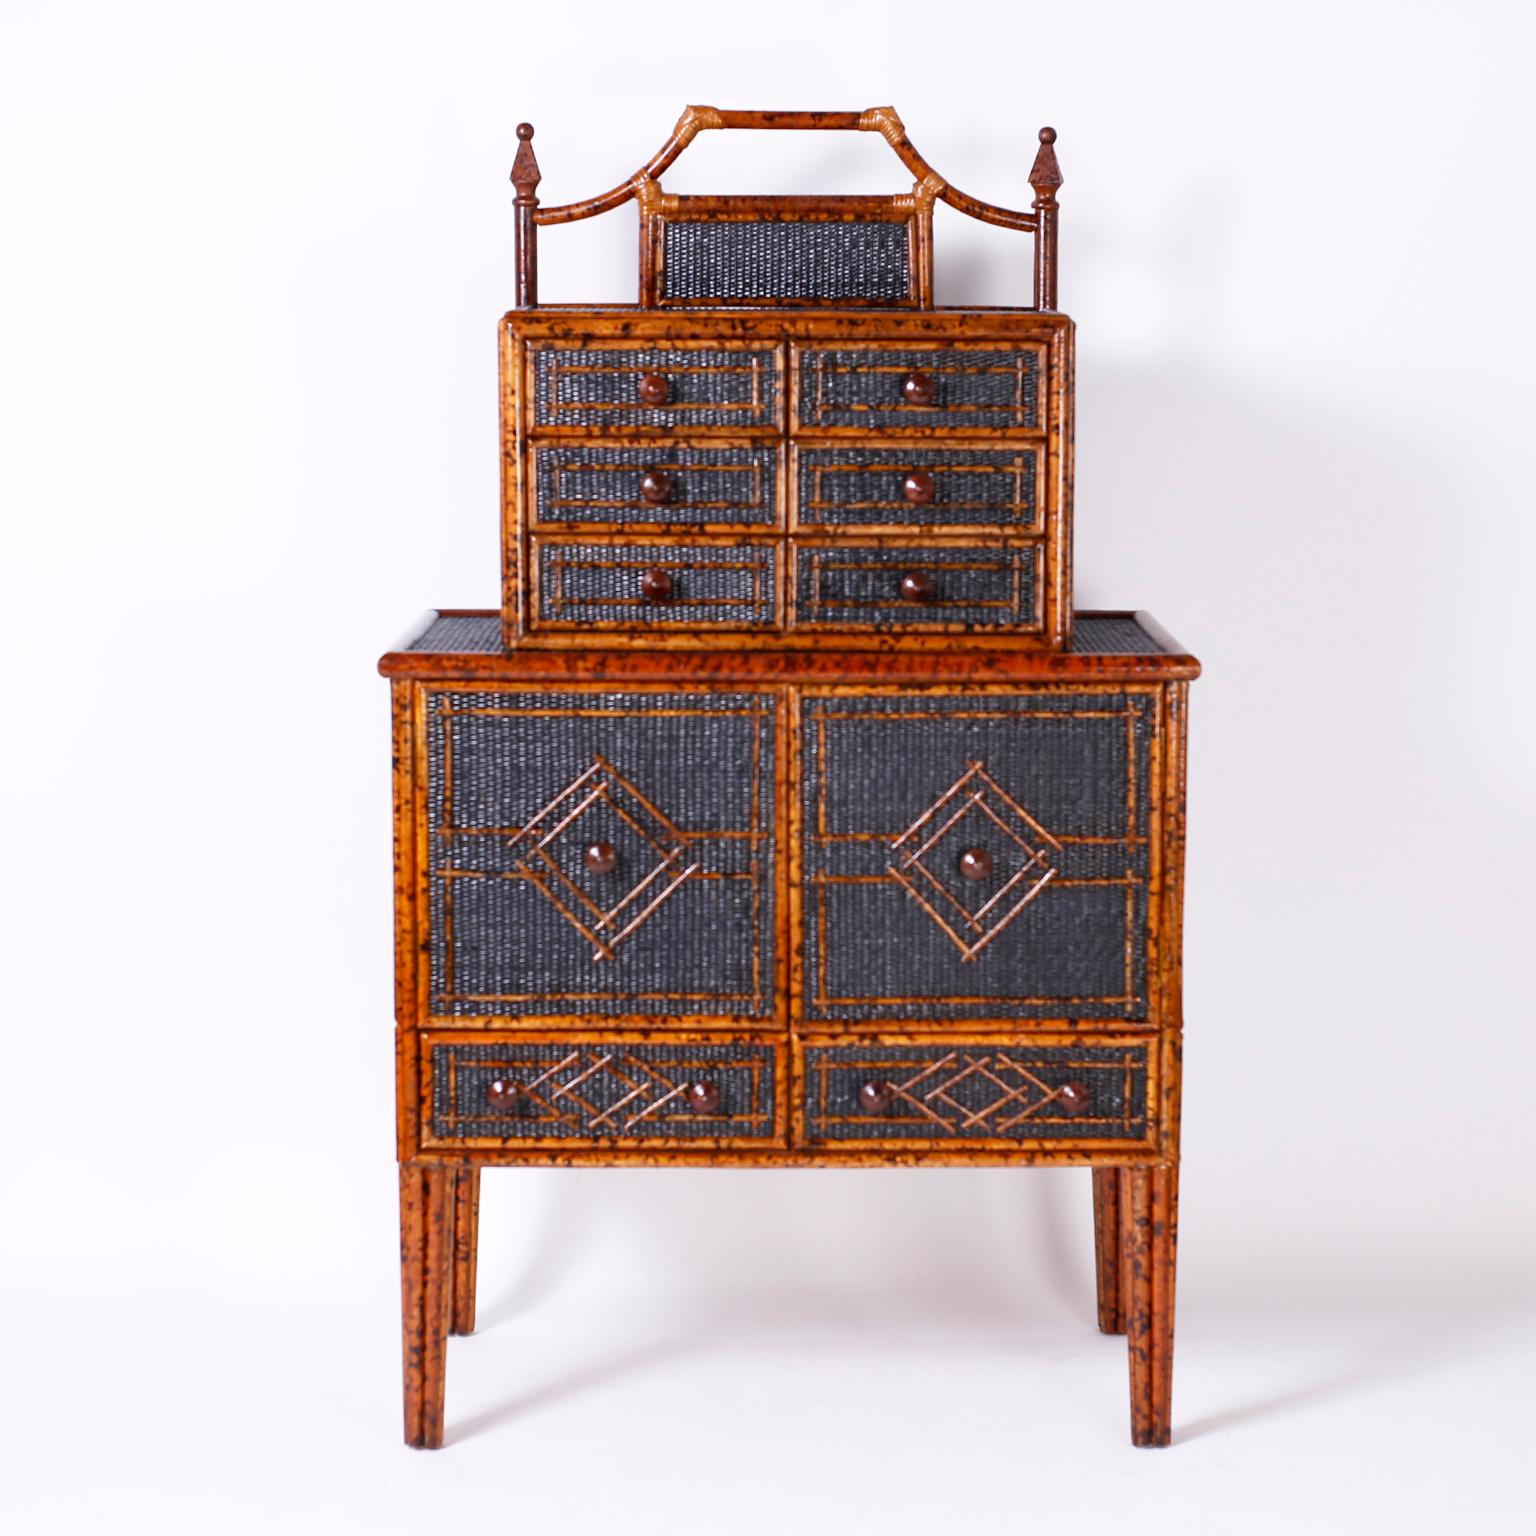 Handsome midcentury British Colonial chest on chest with six drawers above and a cabinet and two drawers below. Crafted with a faux bamboo frame having a faux tortoise finish, panels of black painted grasscloth under geometric designs and long